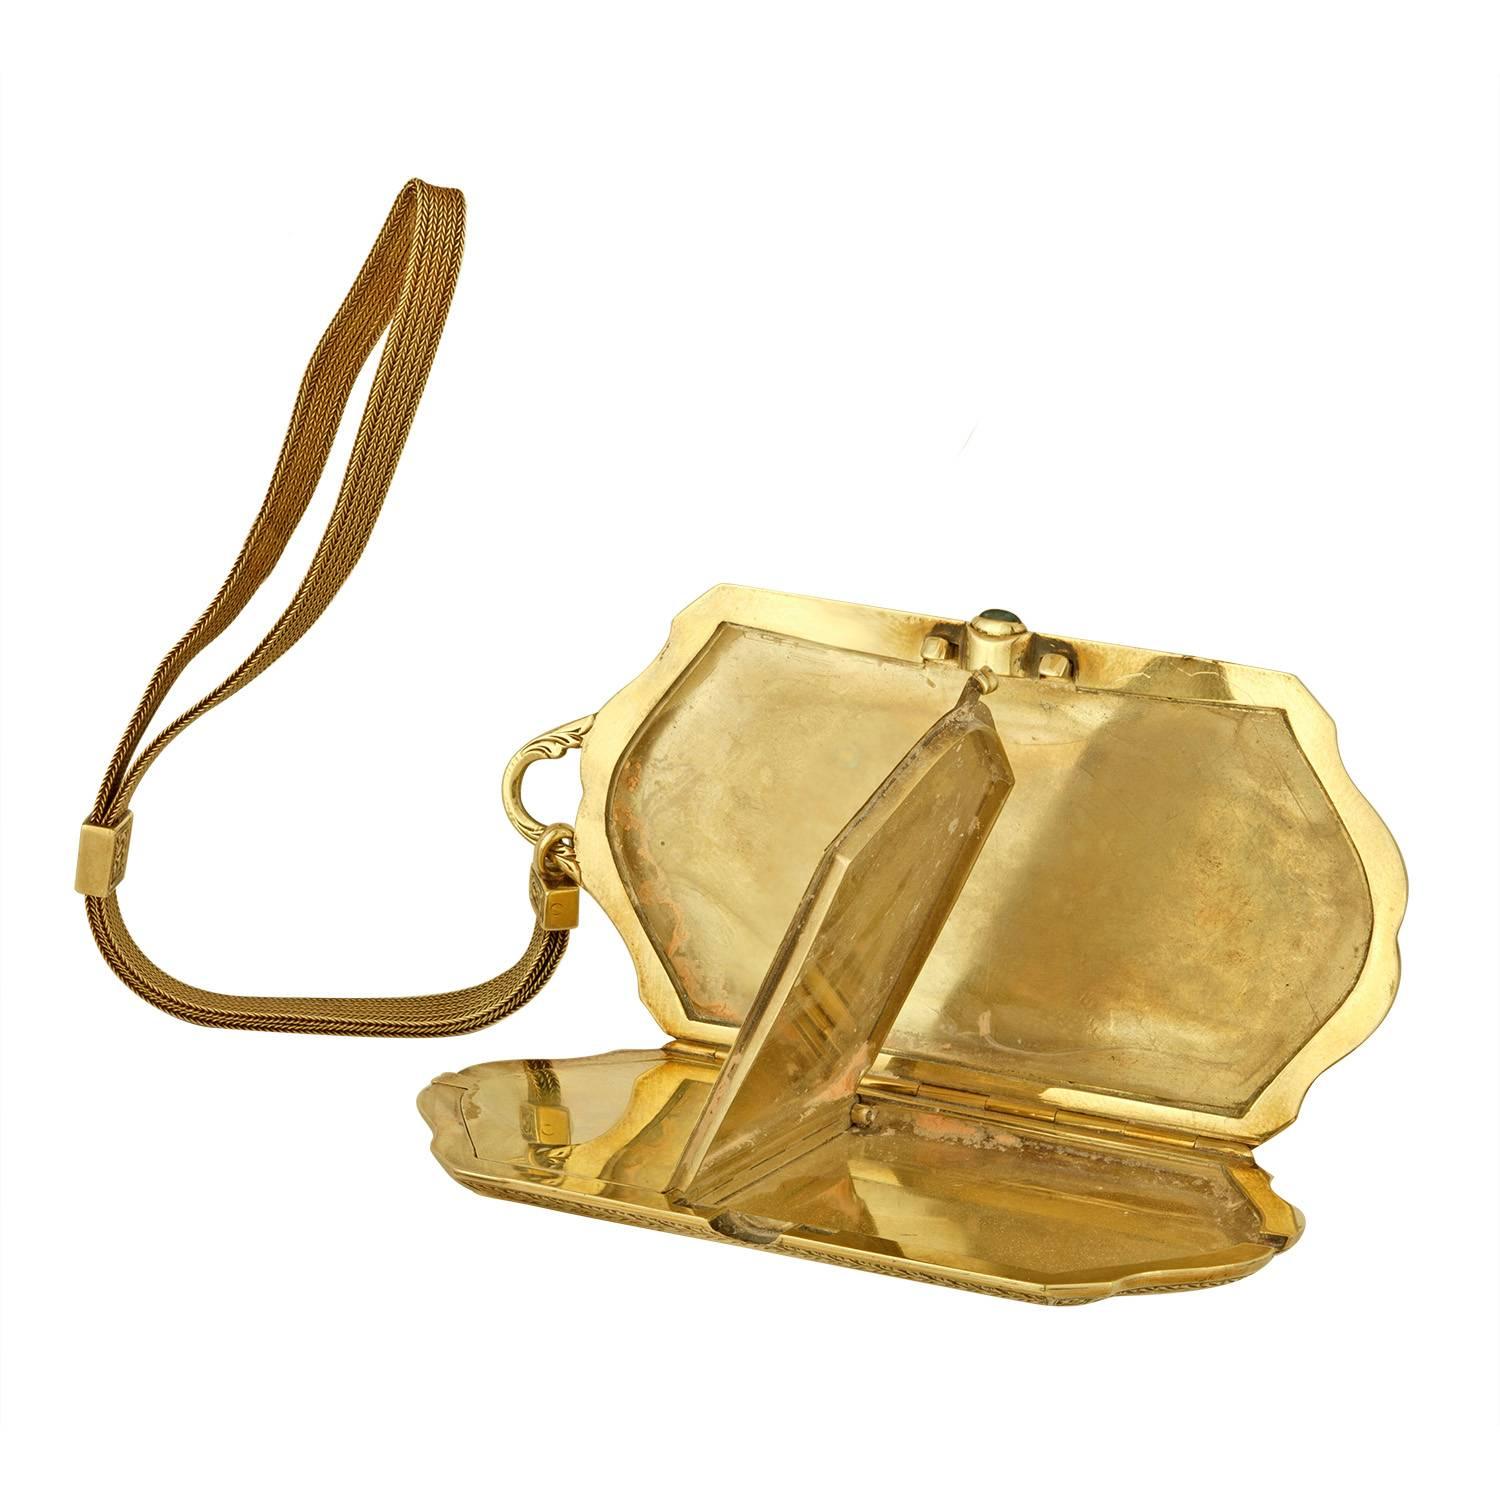 Very Unusual Art Deco Wristlet Compact
The compact is 14K Yellow Gold
It has a Blue Sapphire Cabachon On the Clasp.
The compact is made by Schanfein & Tamis
Between 1915-1931
The compact has stamps 